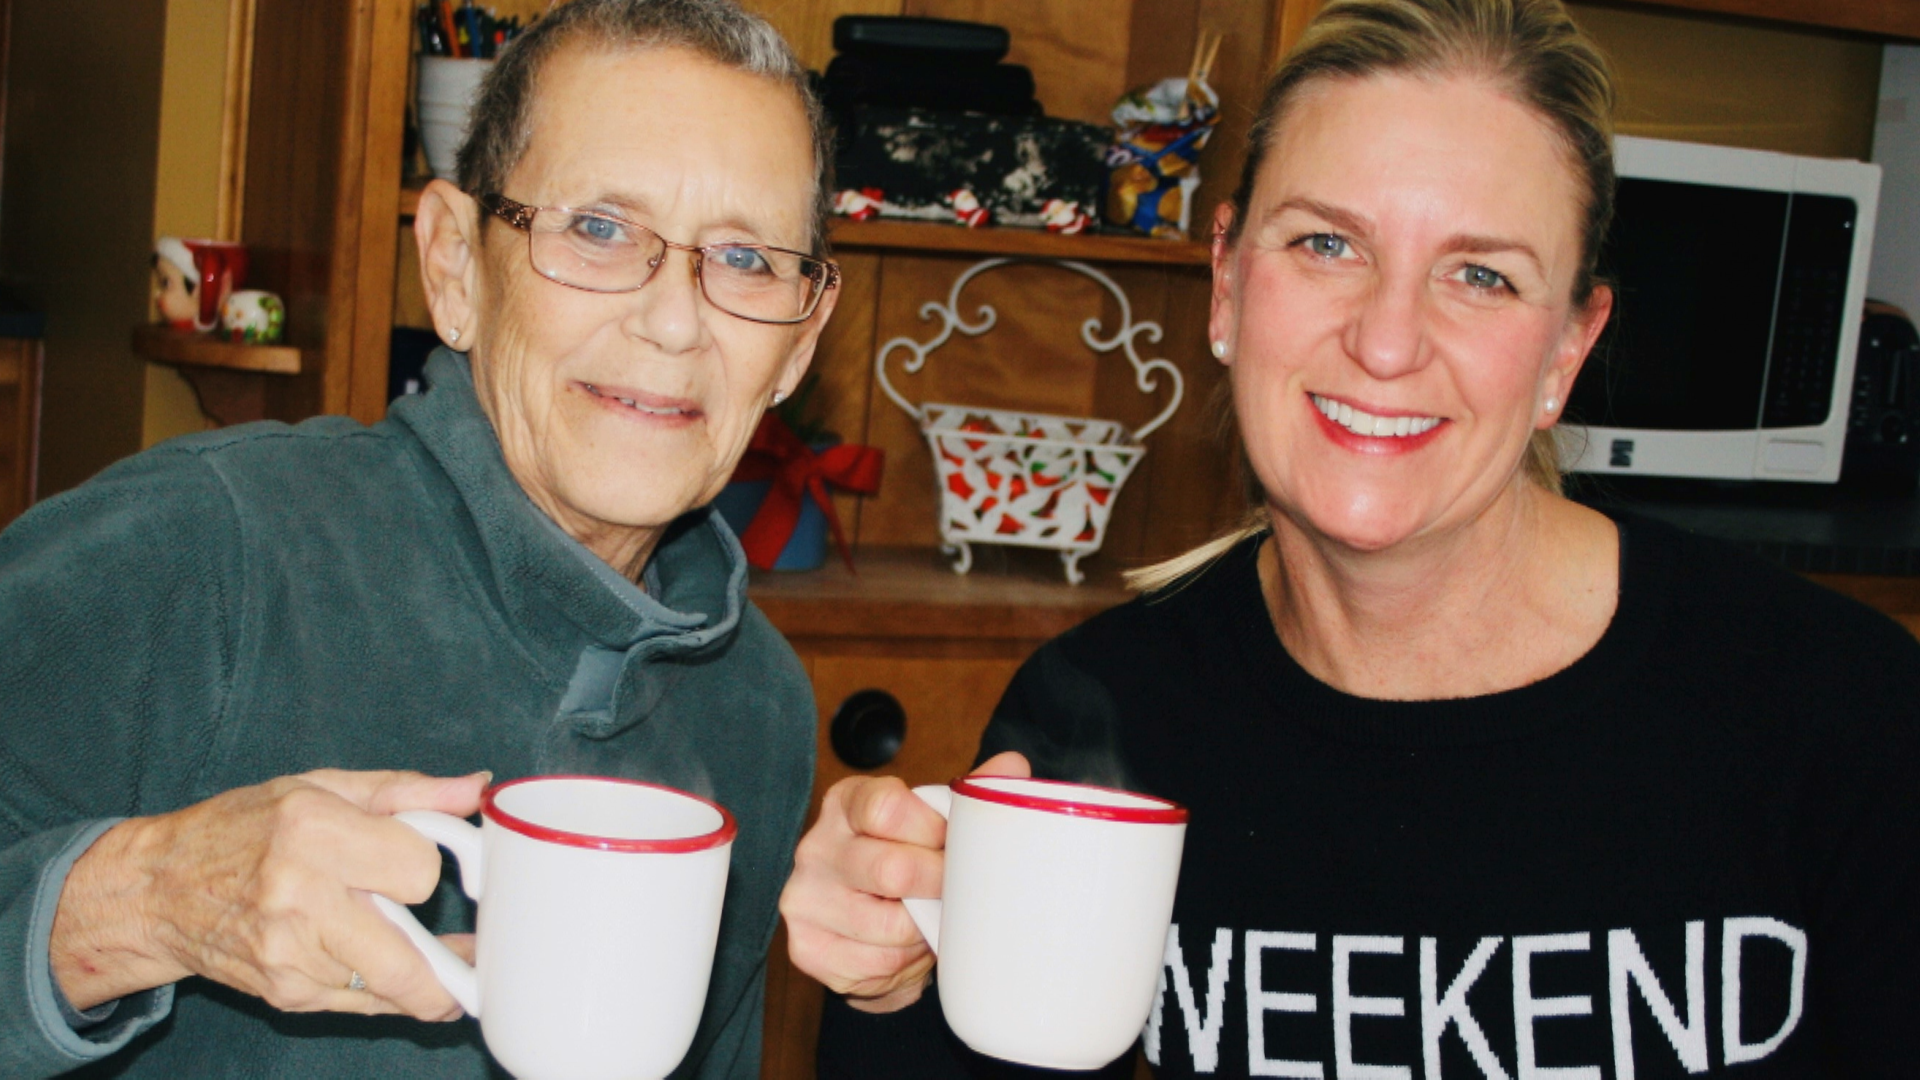 A Minnesota woman is honoring her mother while making a difference through cups of coffee.